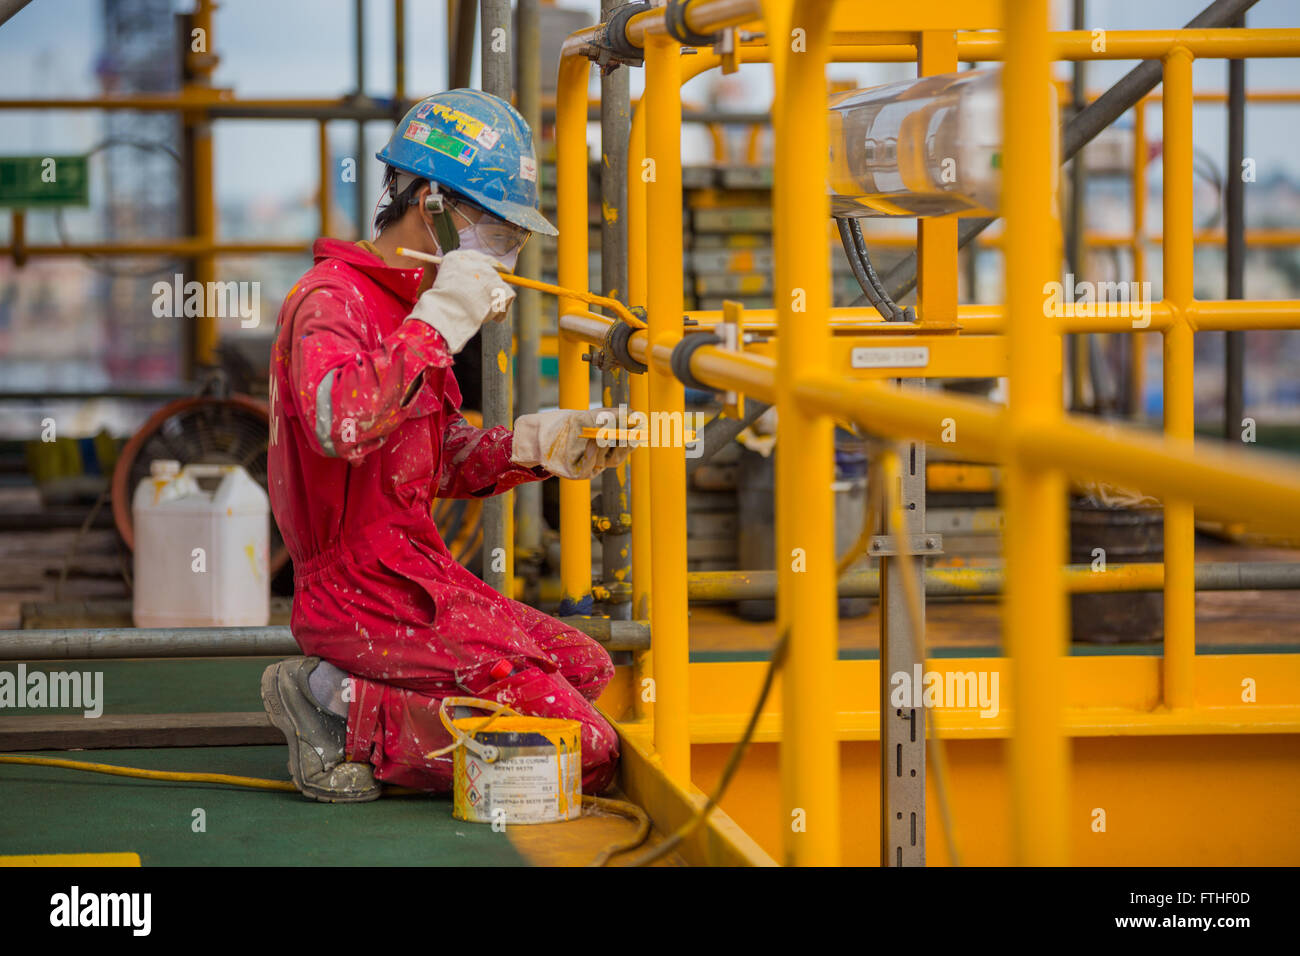 Man painting an oil rig Stock Photo